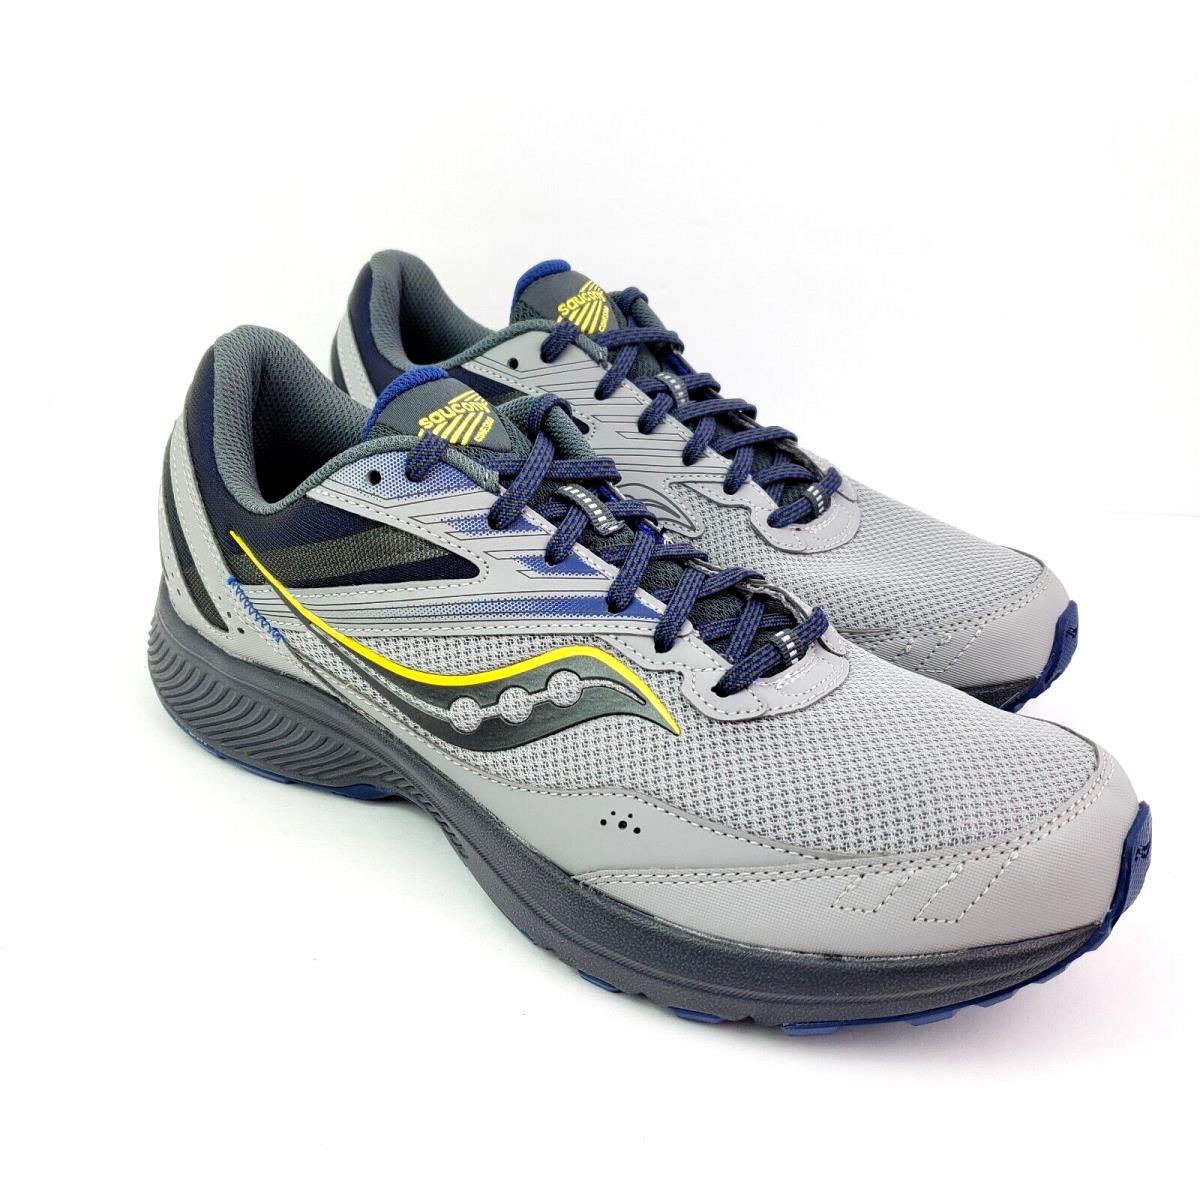 Saucony Cohesion TR15 Mens Size 10 Alloy Gray Sapphire Train Running Shoes